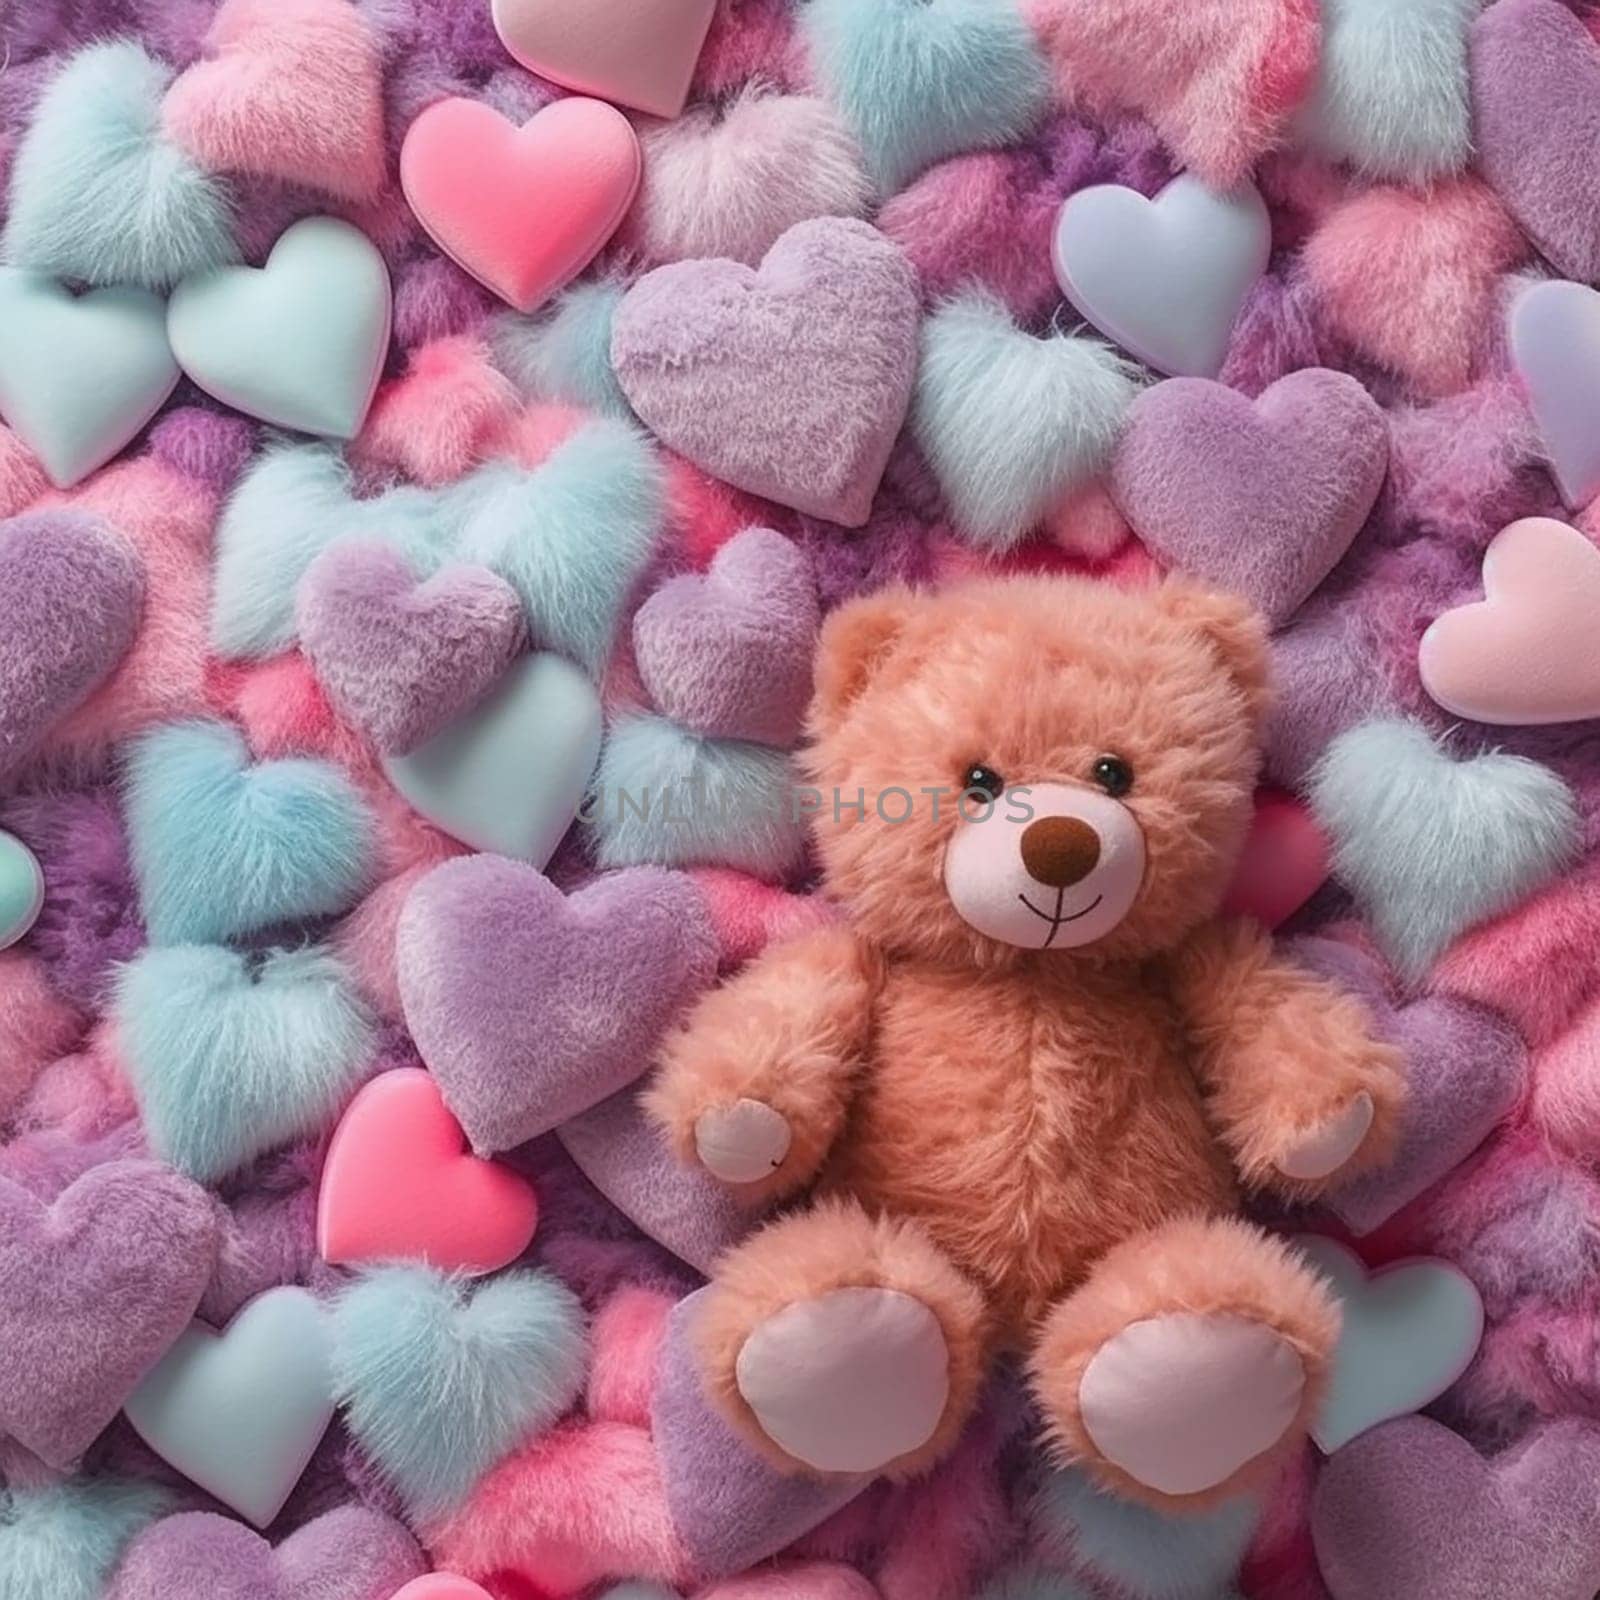 A teddy bear surrounded by colorful hearts on a fluffy background.